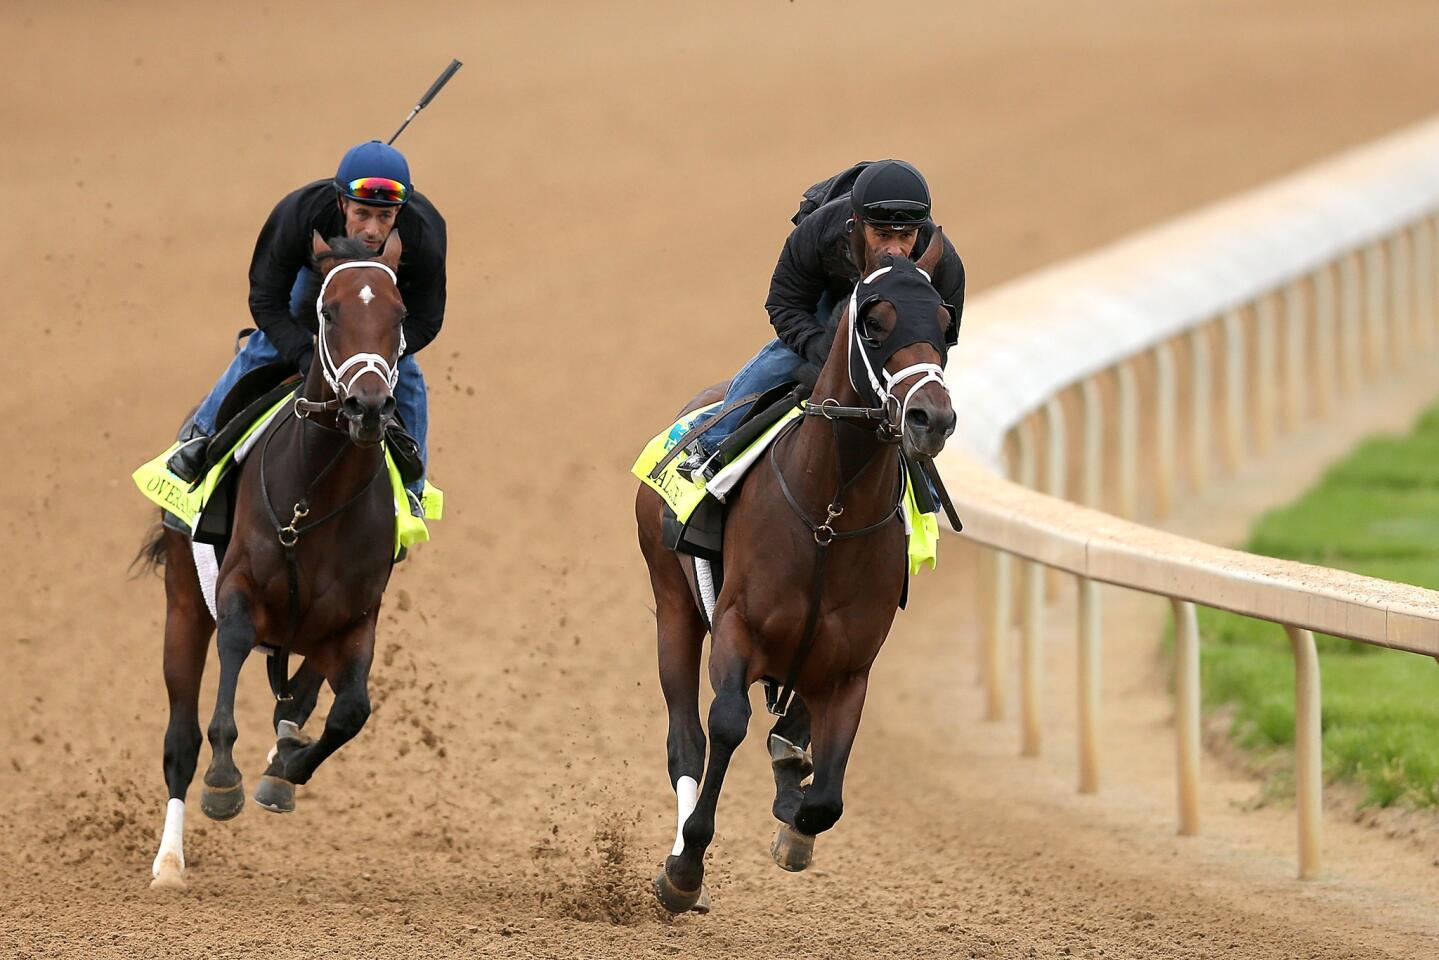 Overanalyze, ridden by Gary Stevens, and Palace Malice, ridden by Mike Smith, work out together during the morning exercise session in preparation for the 139th Kentucky Derby at Churchill Downs.